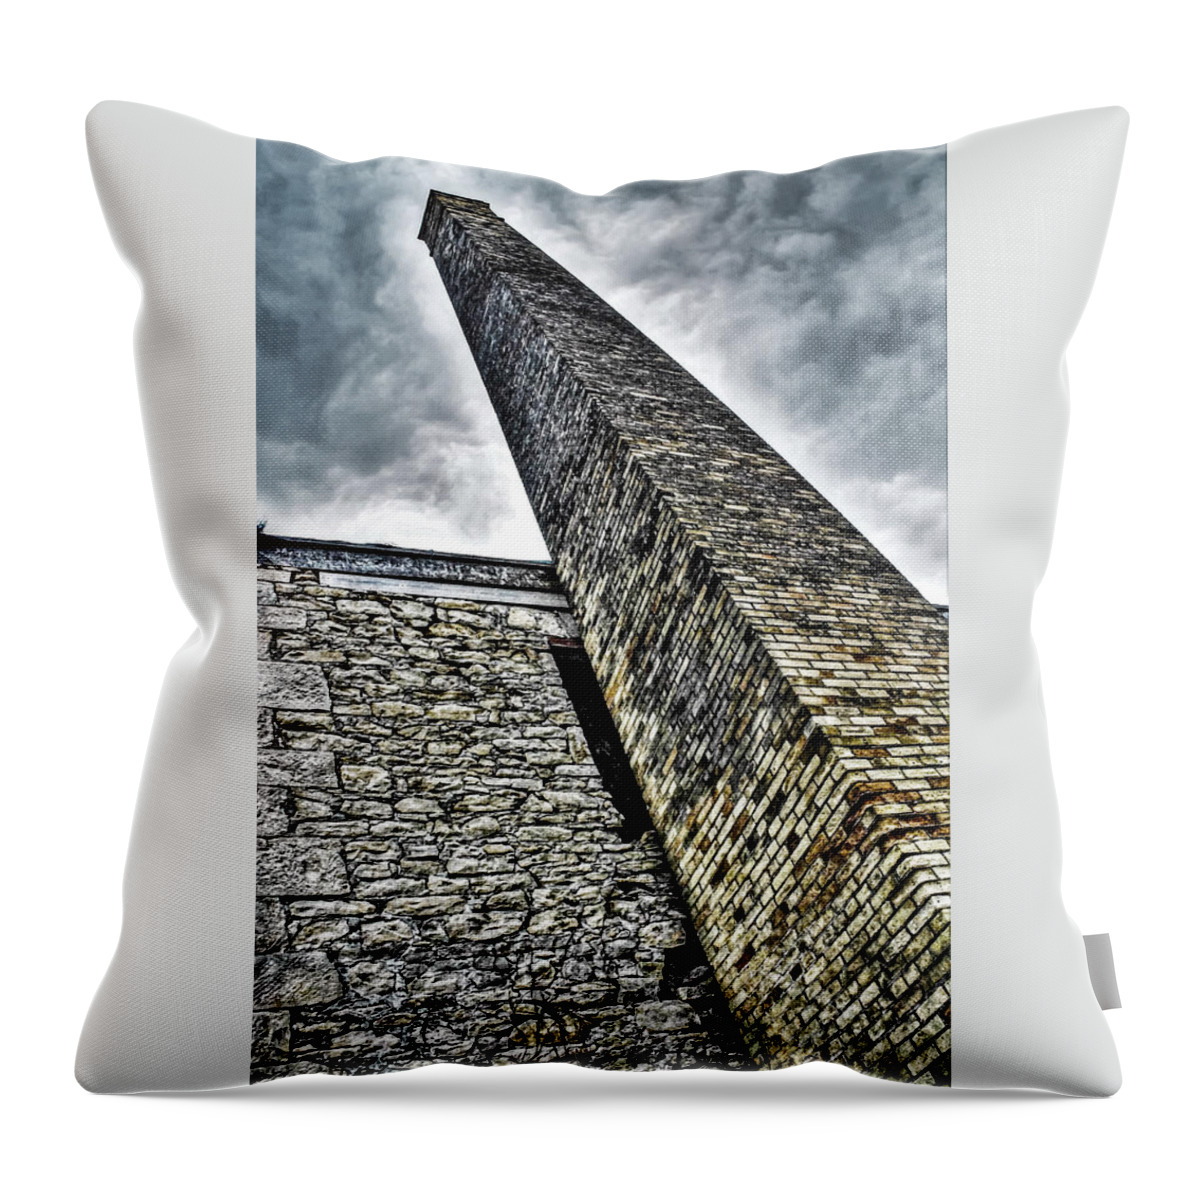 Pollution Throw Pillow featuring the photograph Pollution by Karl Anderson